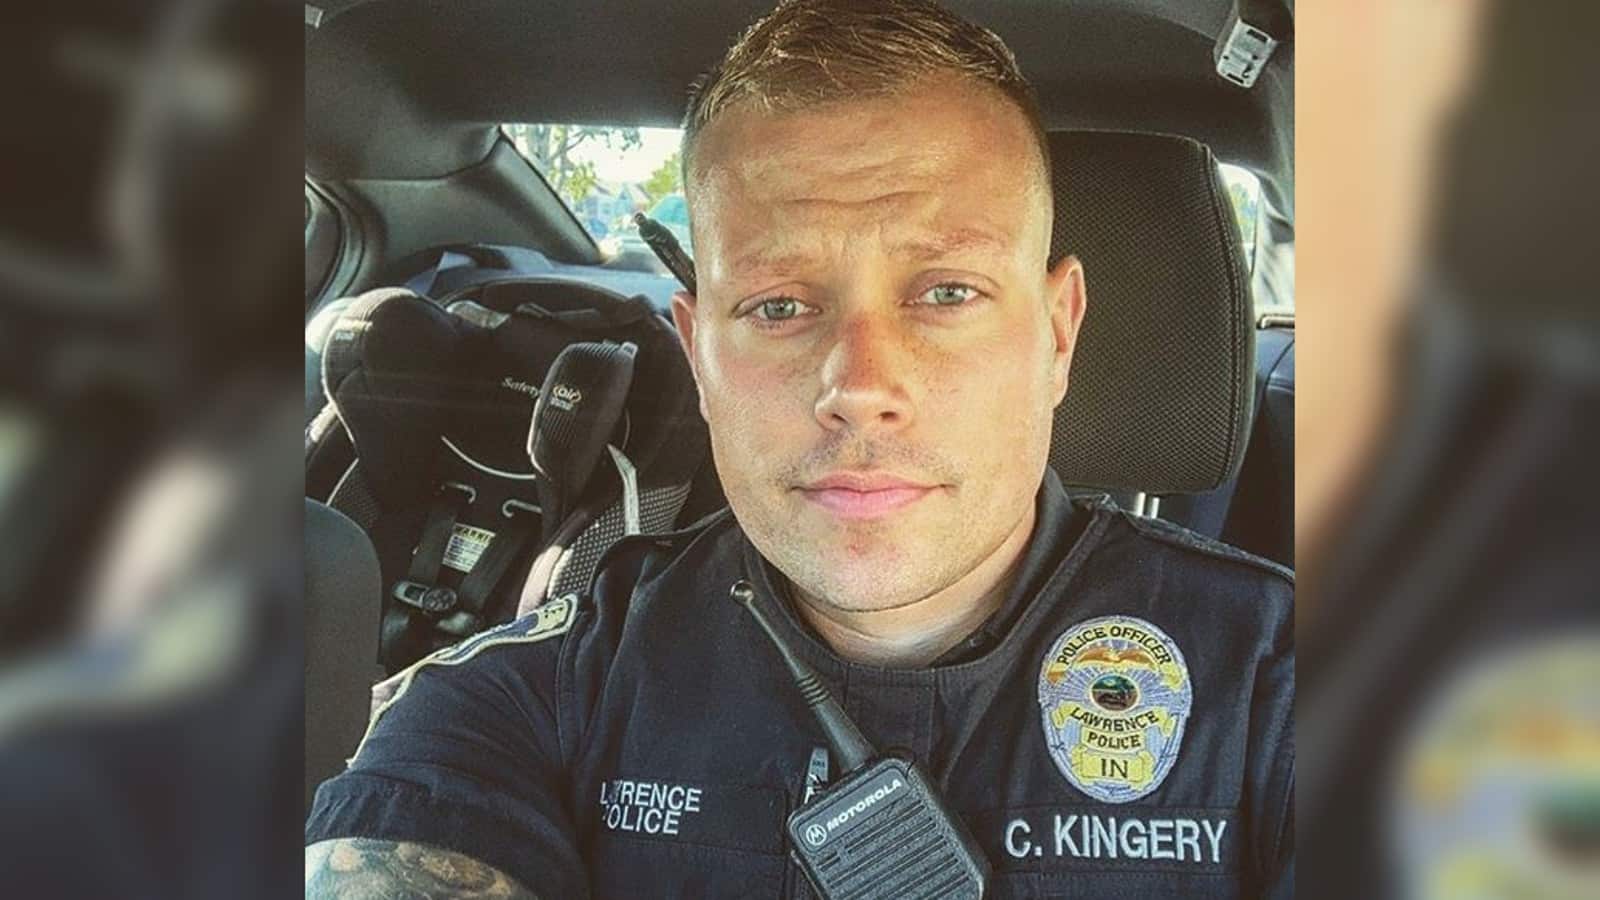 Officer Kingery sitting in a car